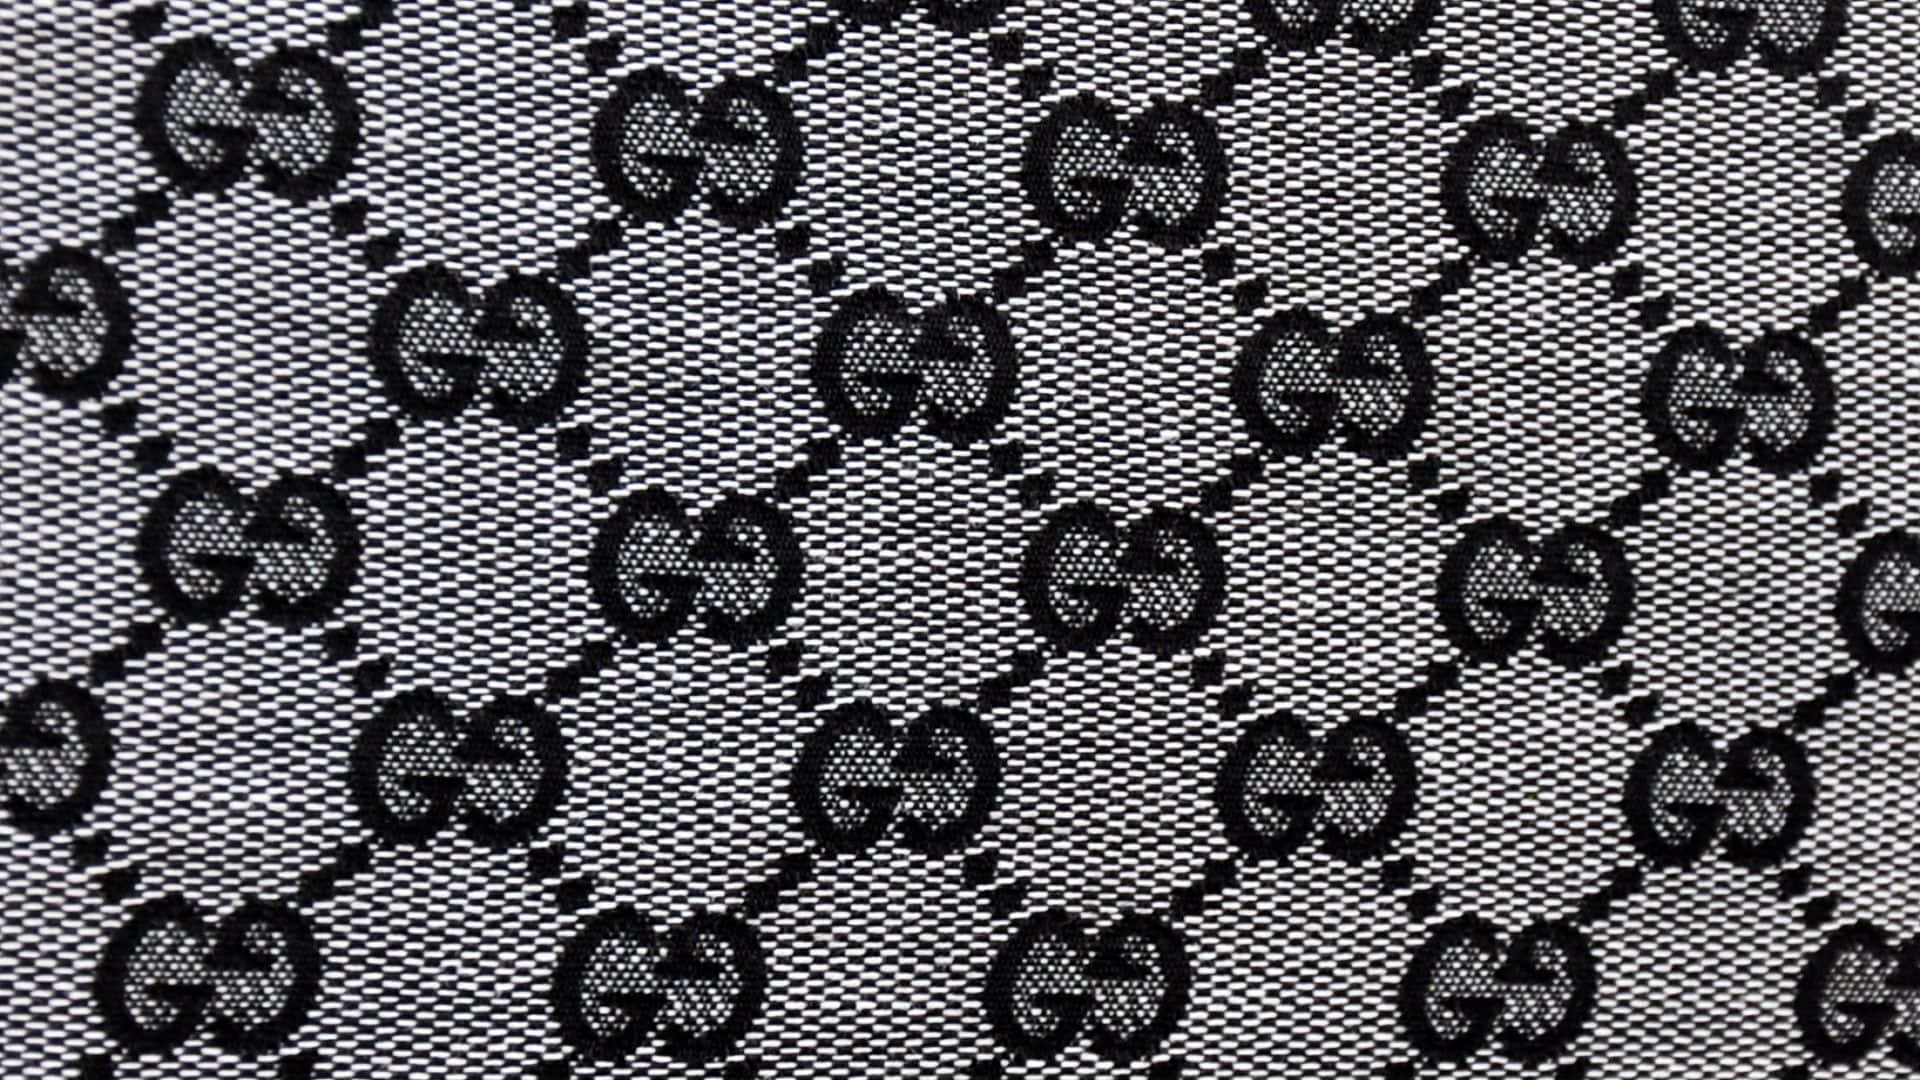 Elegance in Patterns - Gucci-inspired Wallpaper